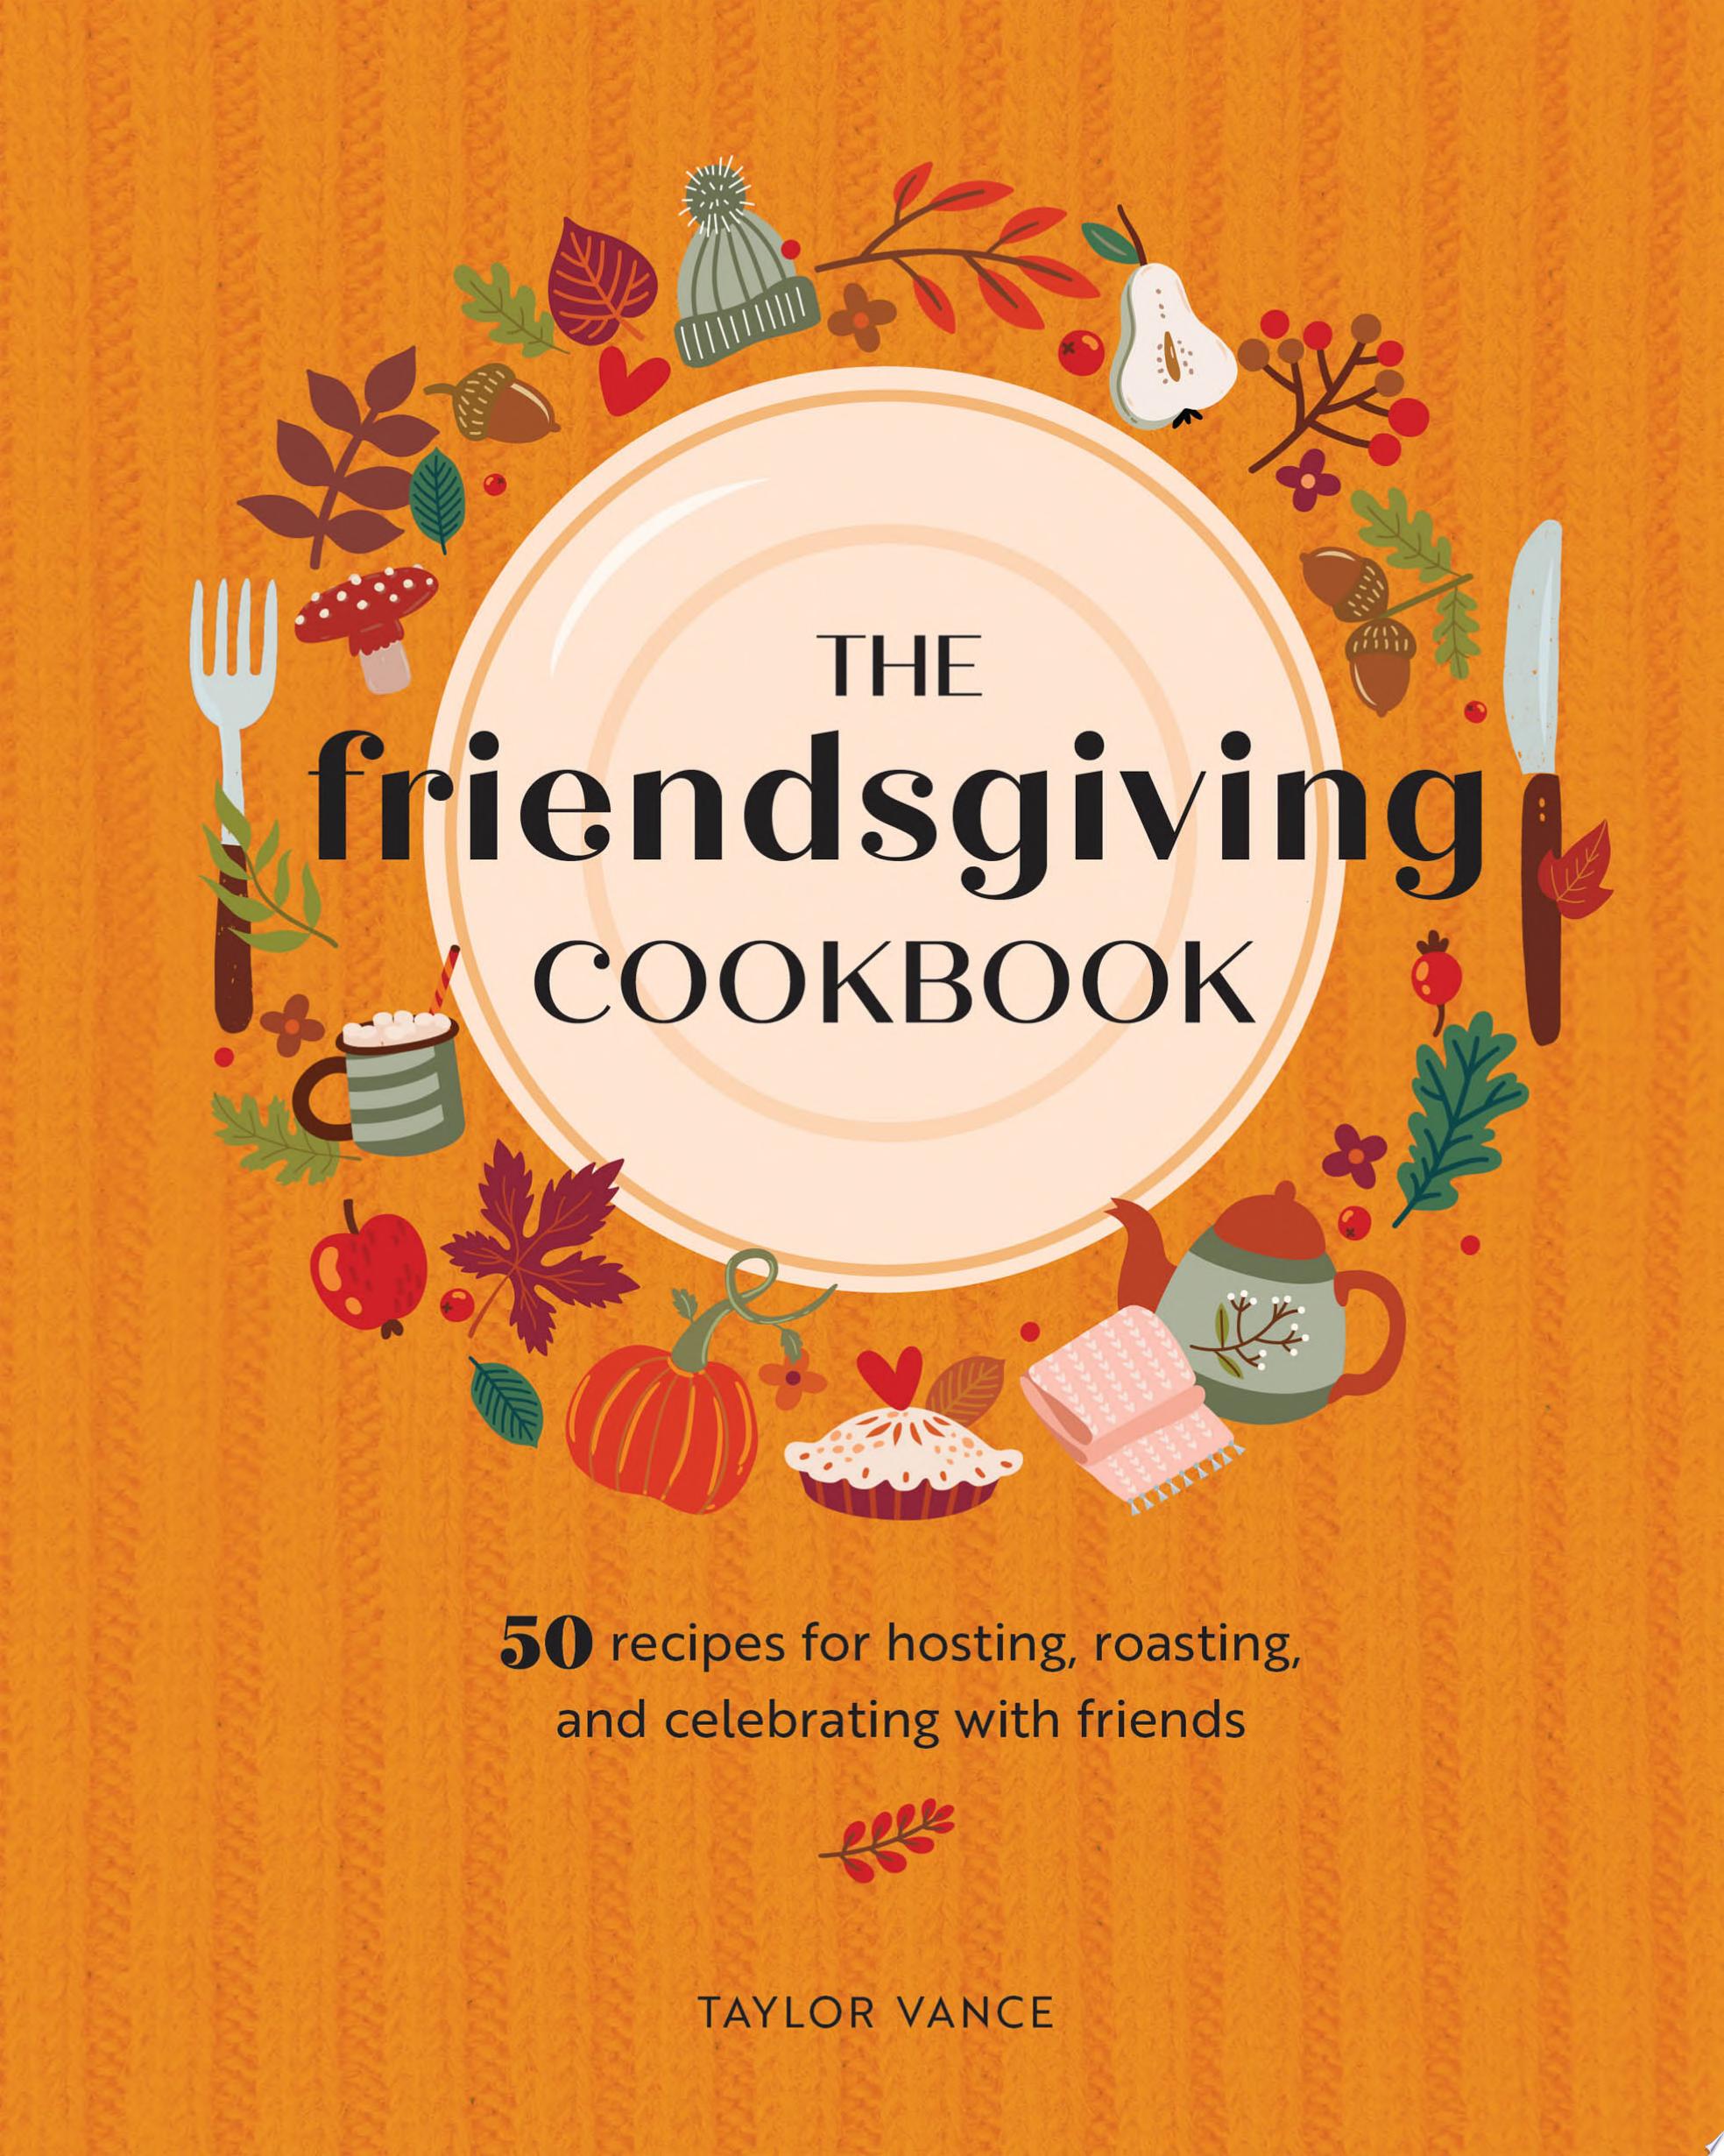 Image for "The Friendsgiving Cookbook"